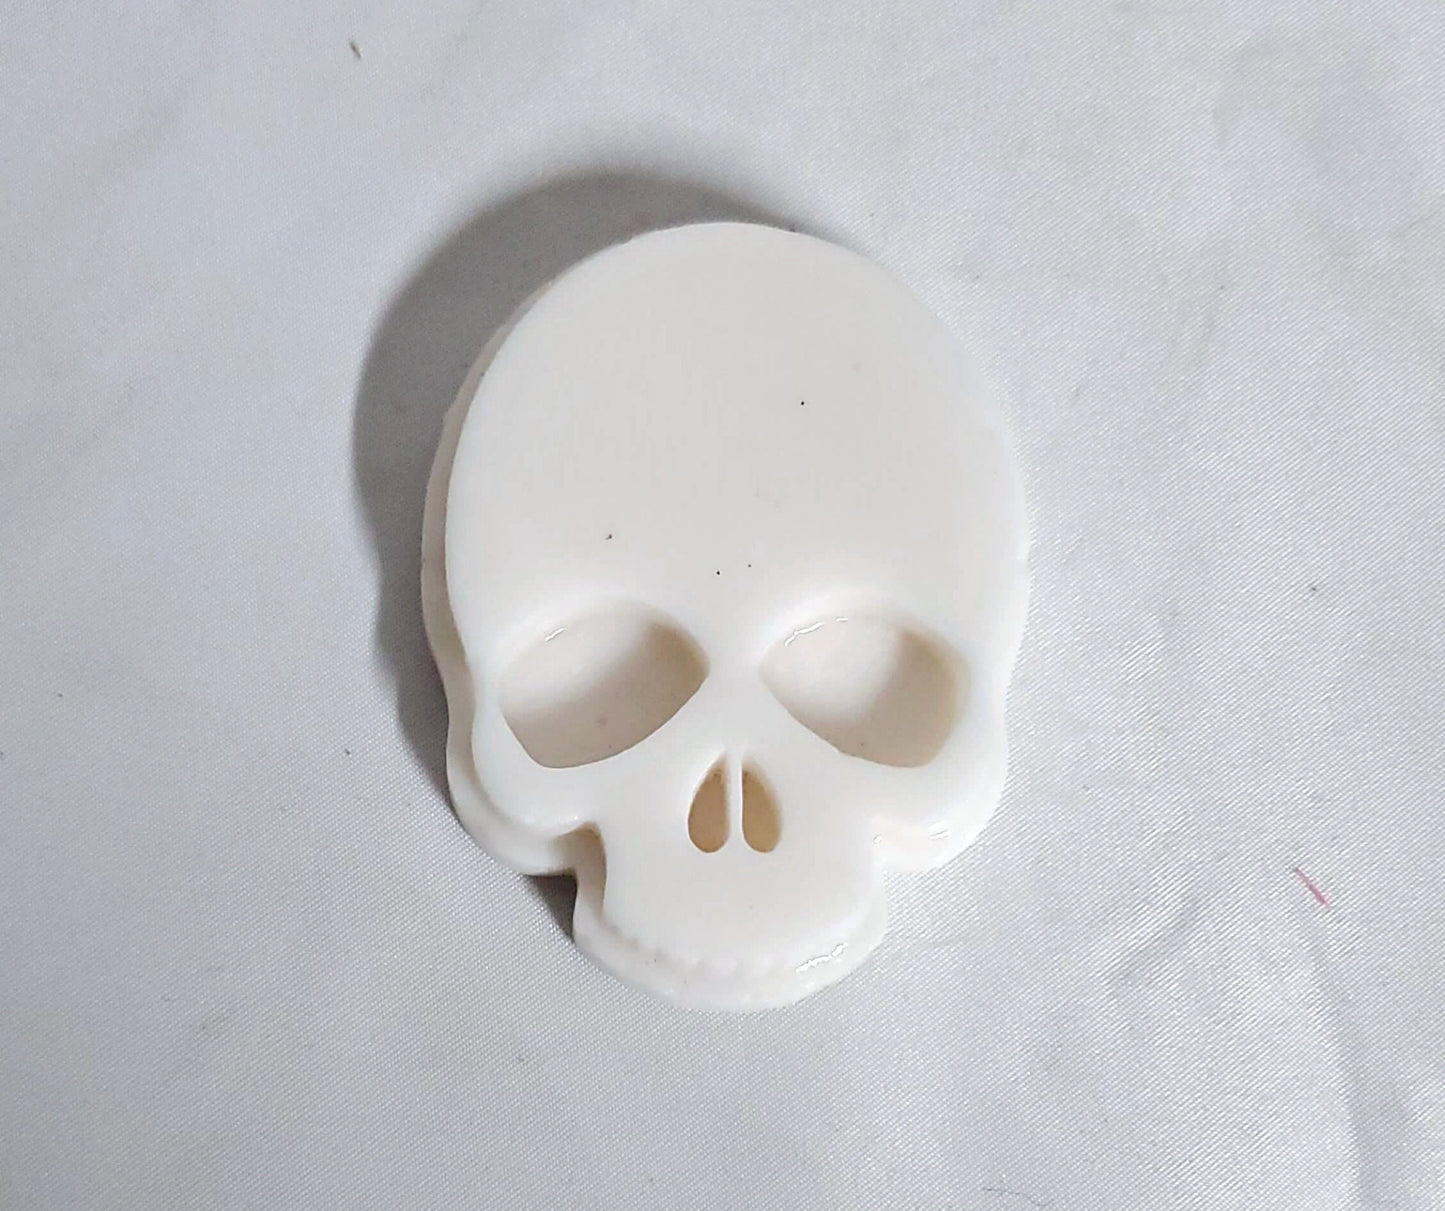 Handmade Skull Gothic Soap made with Shea and Oatmeal Lord and Lady Towers